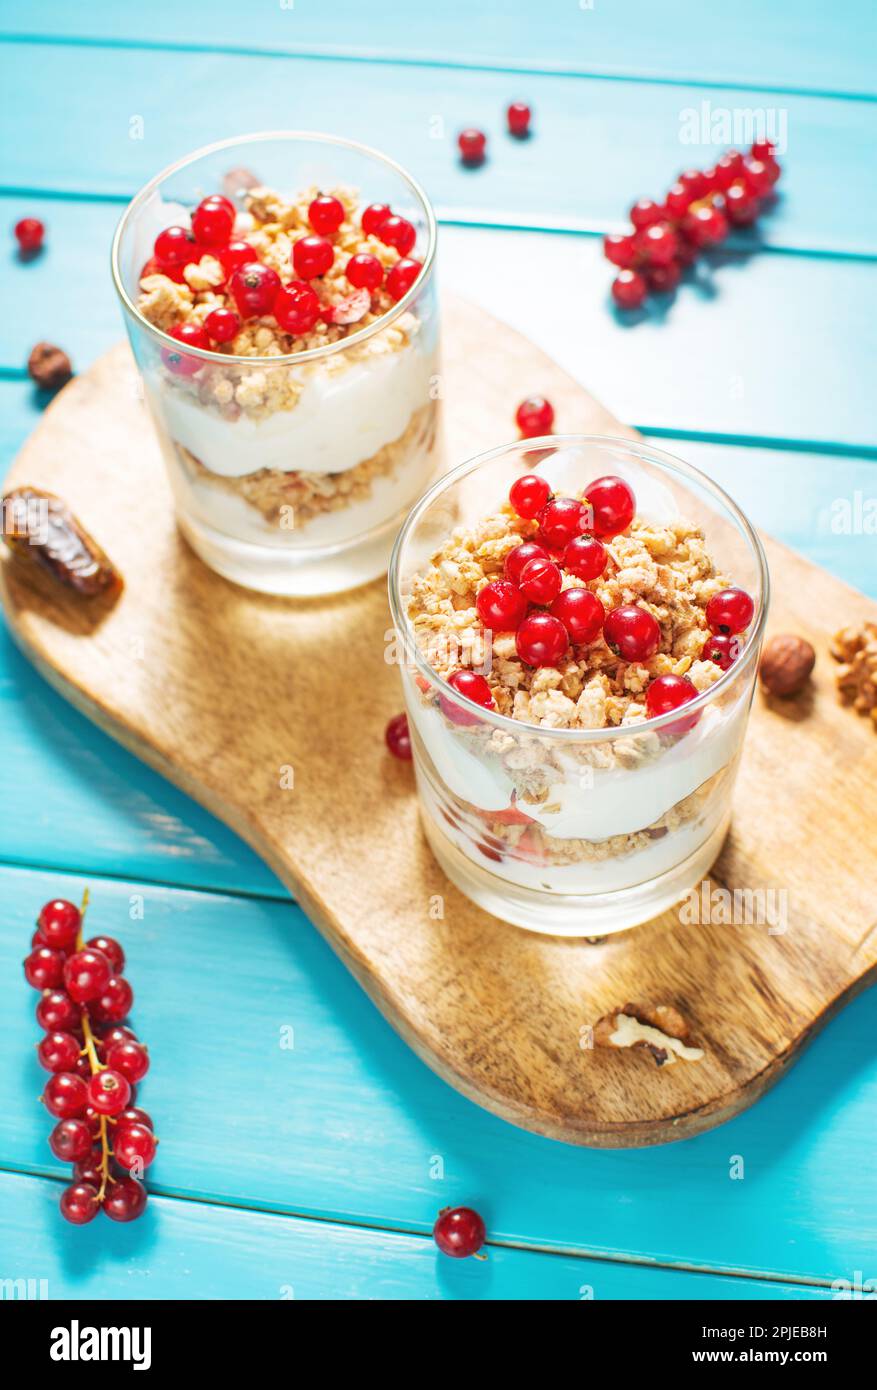 Healthy breakfast menu concept. Morning granola breakfast with berries served with yogurt in glasses. Stock Photo